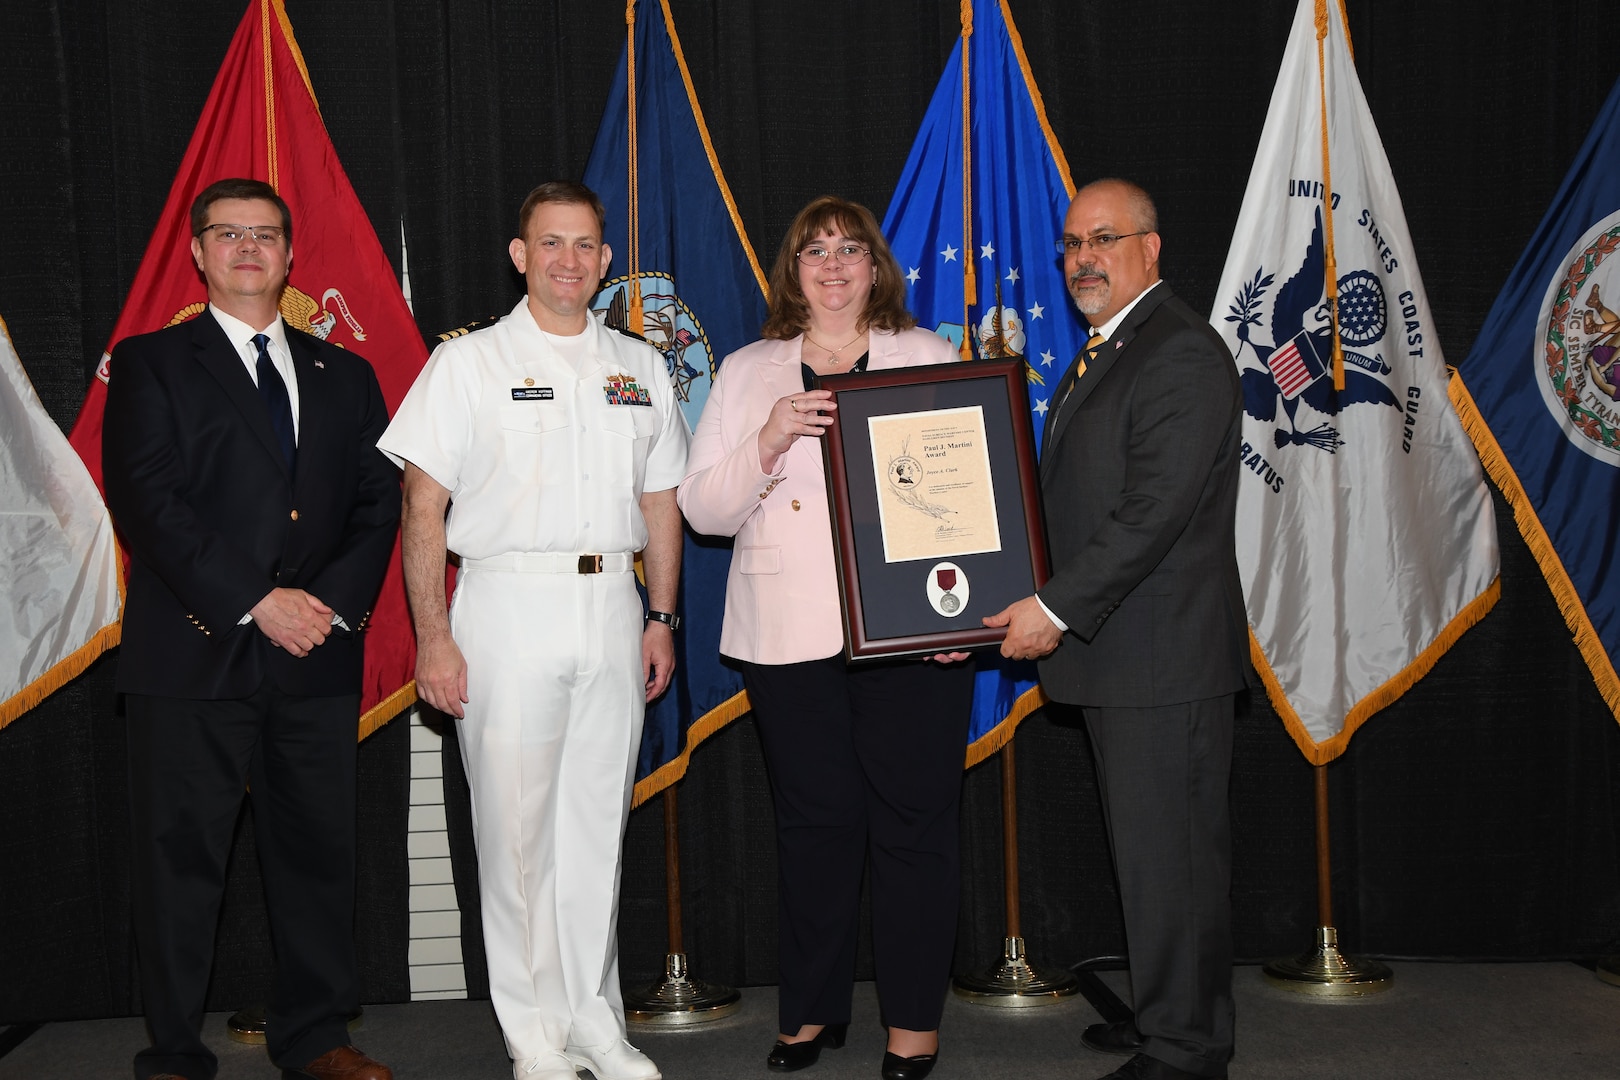 IMAGE: Joyce Clark is presented the Paul J. Martini Award at Naval Surface Warfare Center Dahlgren Division's annual awards ceremony, Apr. 26 at the Fredericksburg Expo and Conference Center.

The award is named in honor of Paul J. Martini, who was head of the Engineering Support Directorate of the Naval Ordnance Laboratory from November 1951 to December 1973.